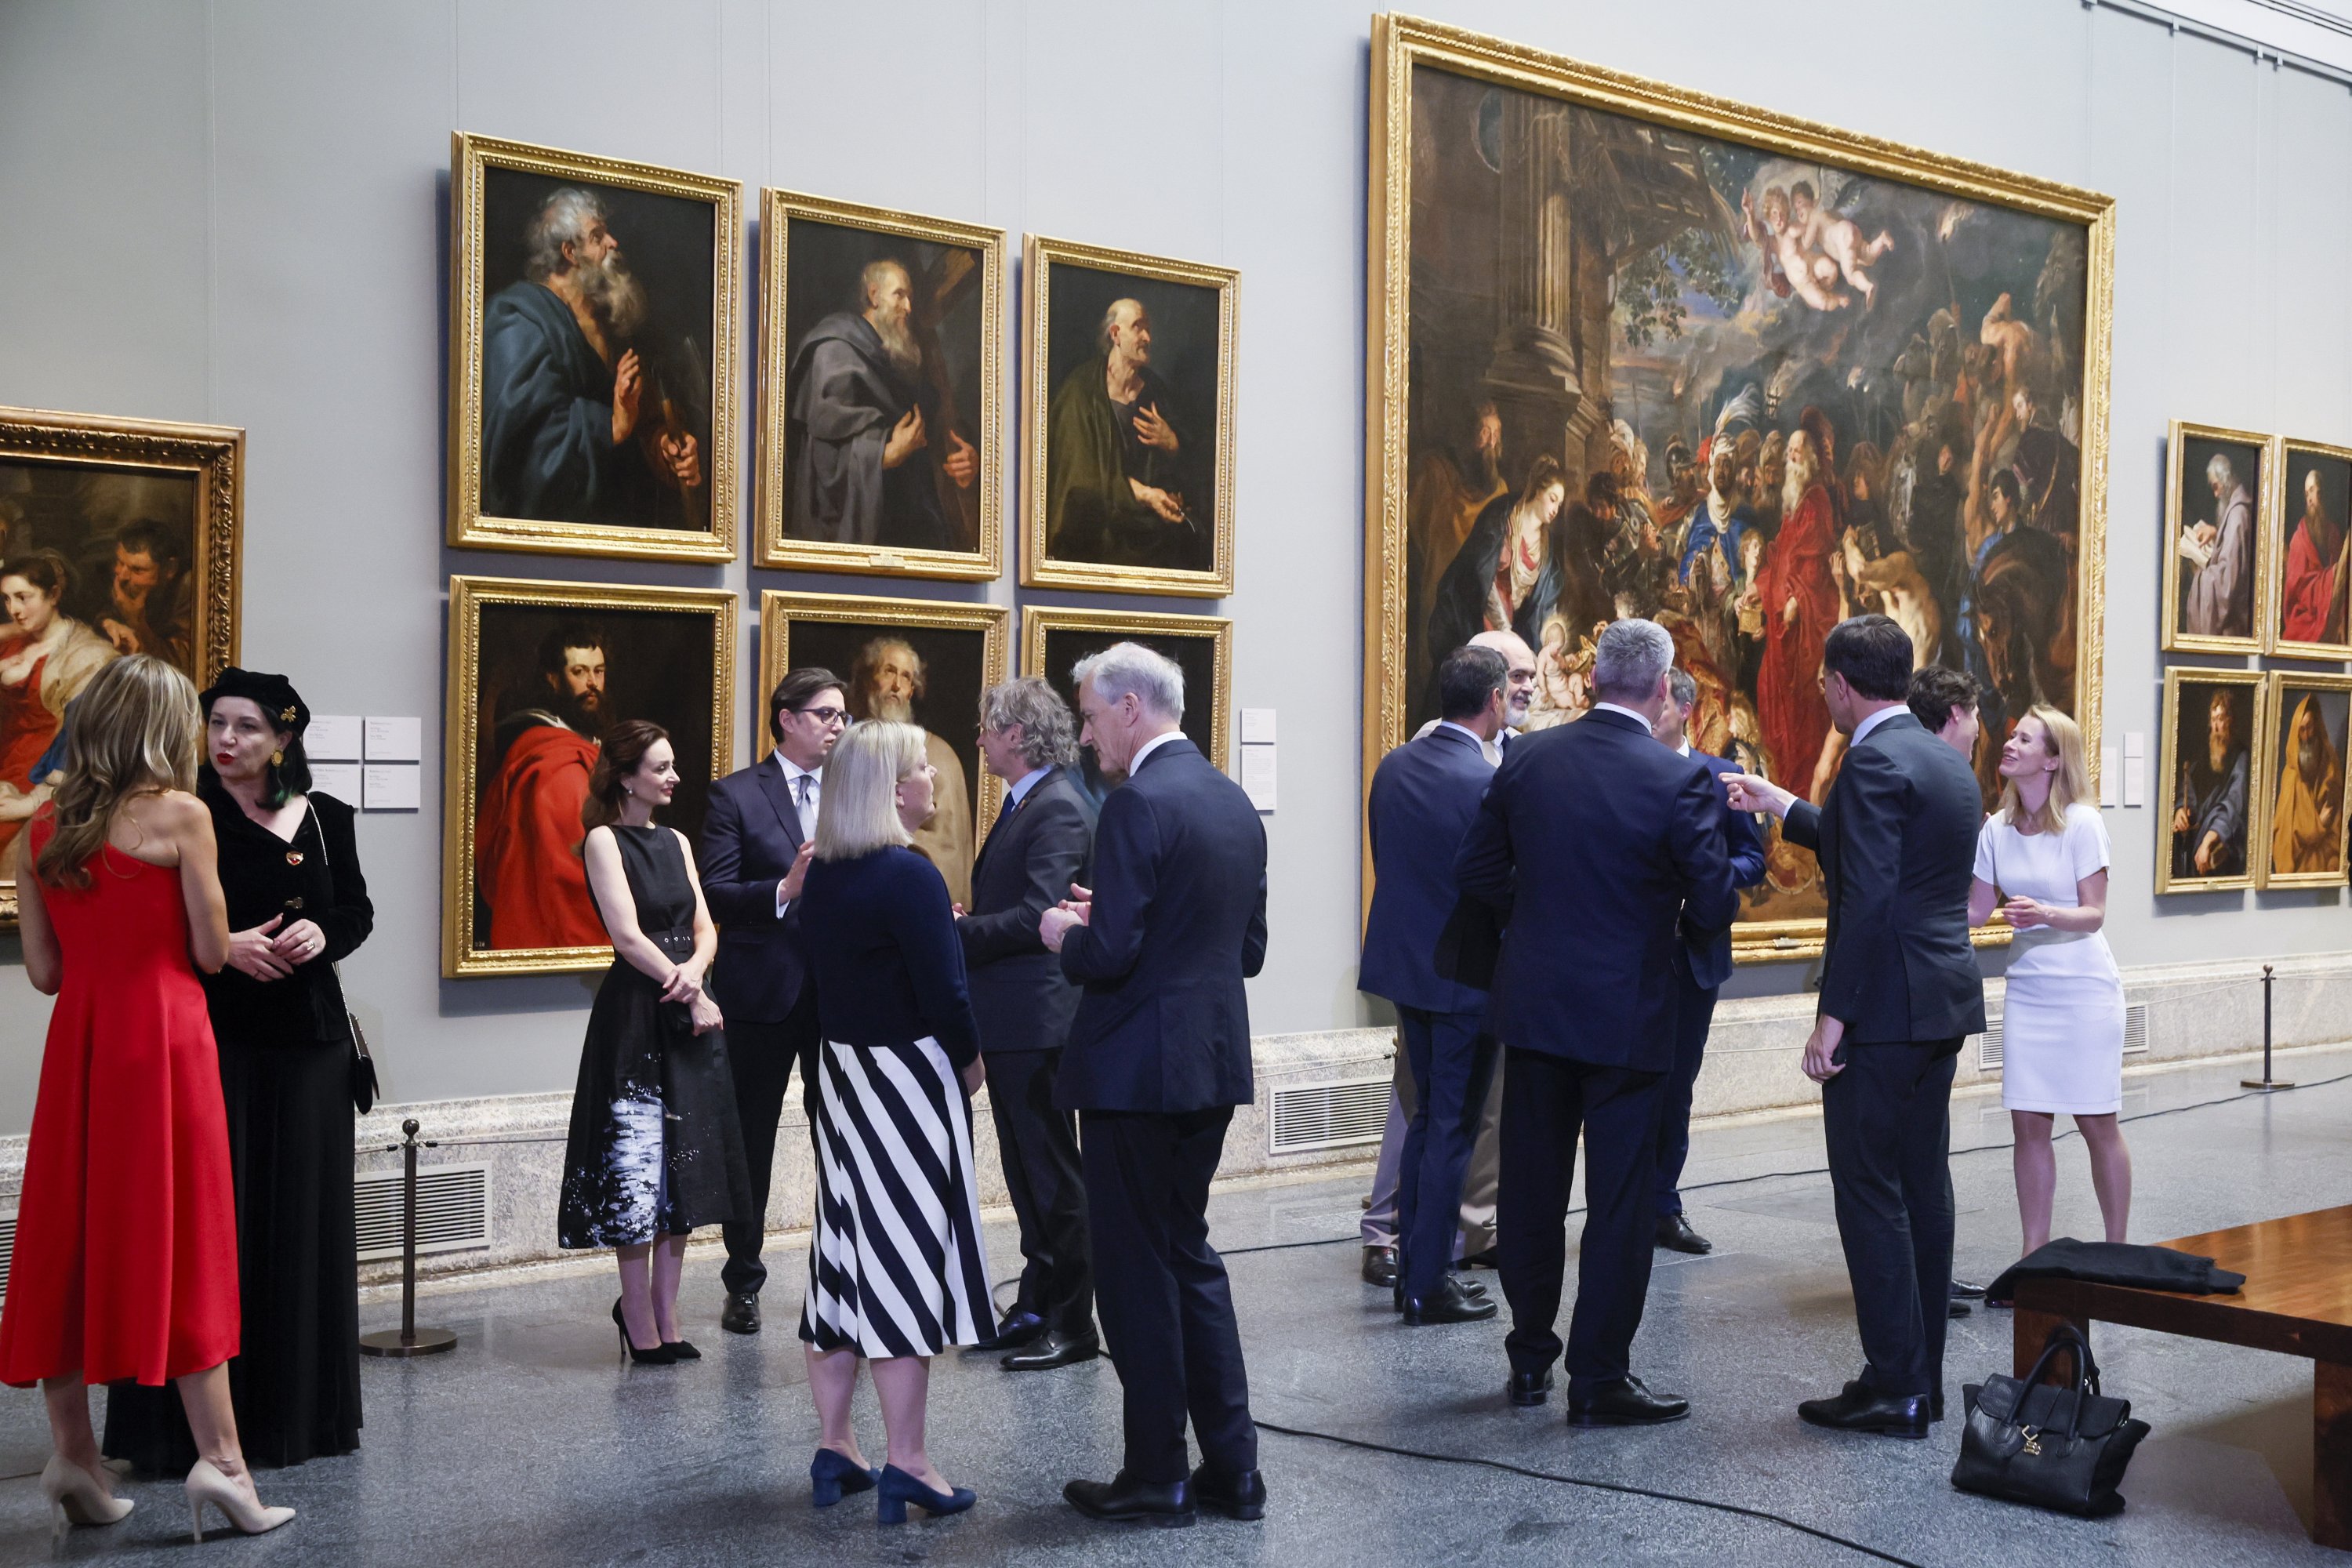 Arrival of guests at the Prado Museum where Spanish Prime Minister Pedro Sanchez hosts a dinner for the heads of state and heads of government participating in the NATO summit, Madrid, Spain, June 29, 2022. (EPA Photo)